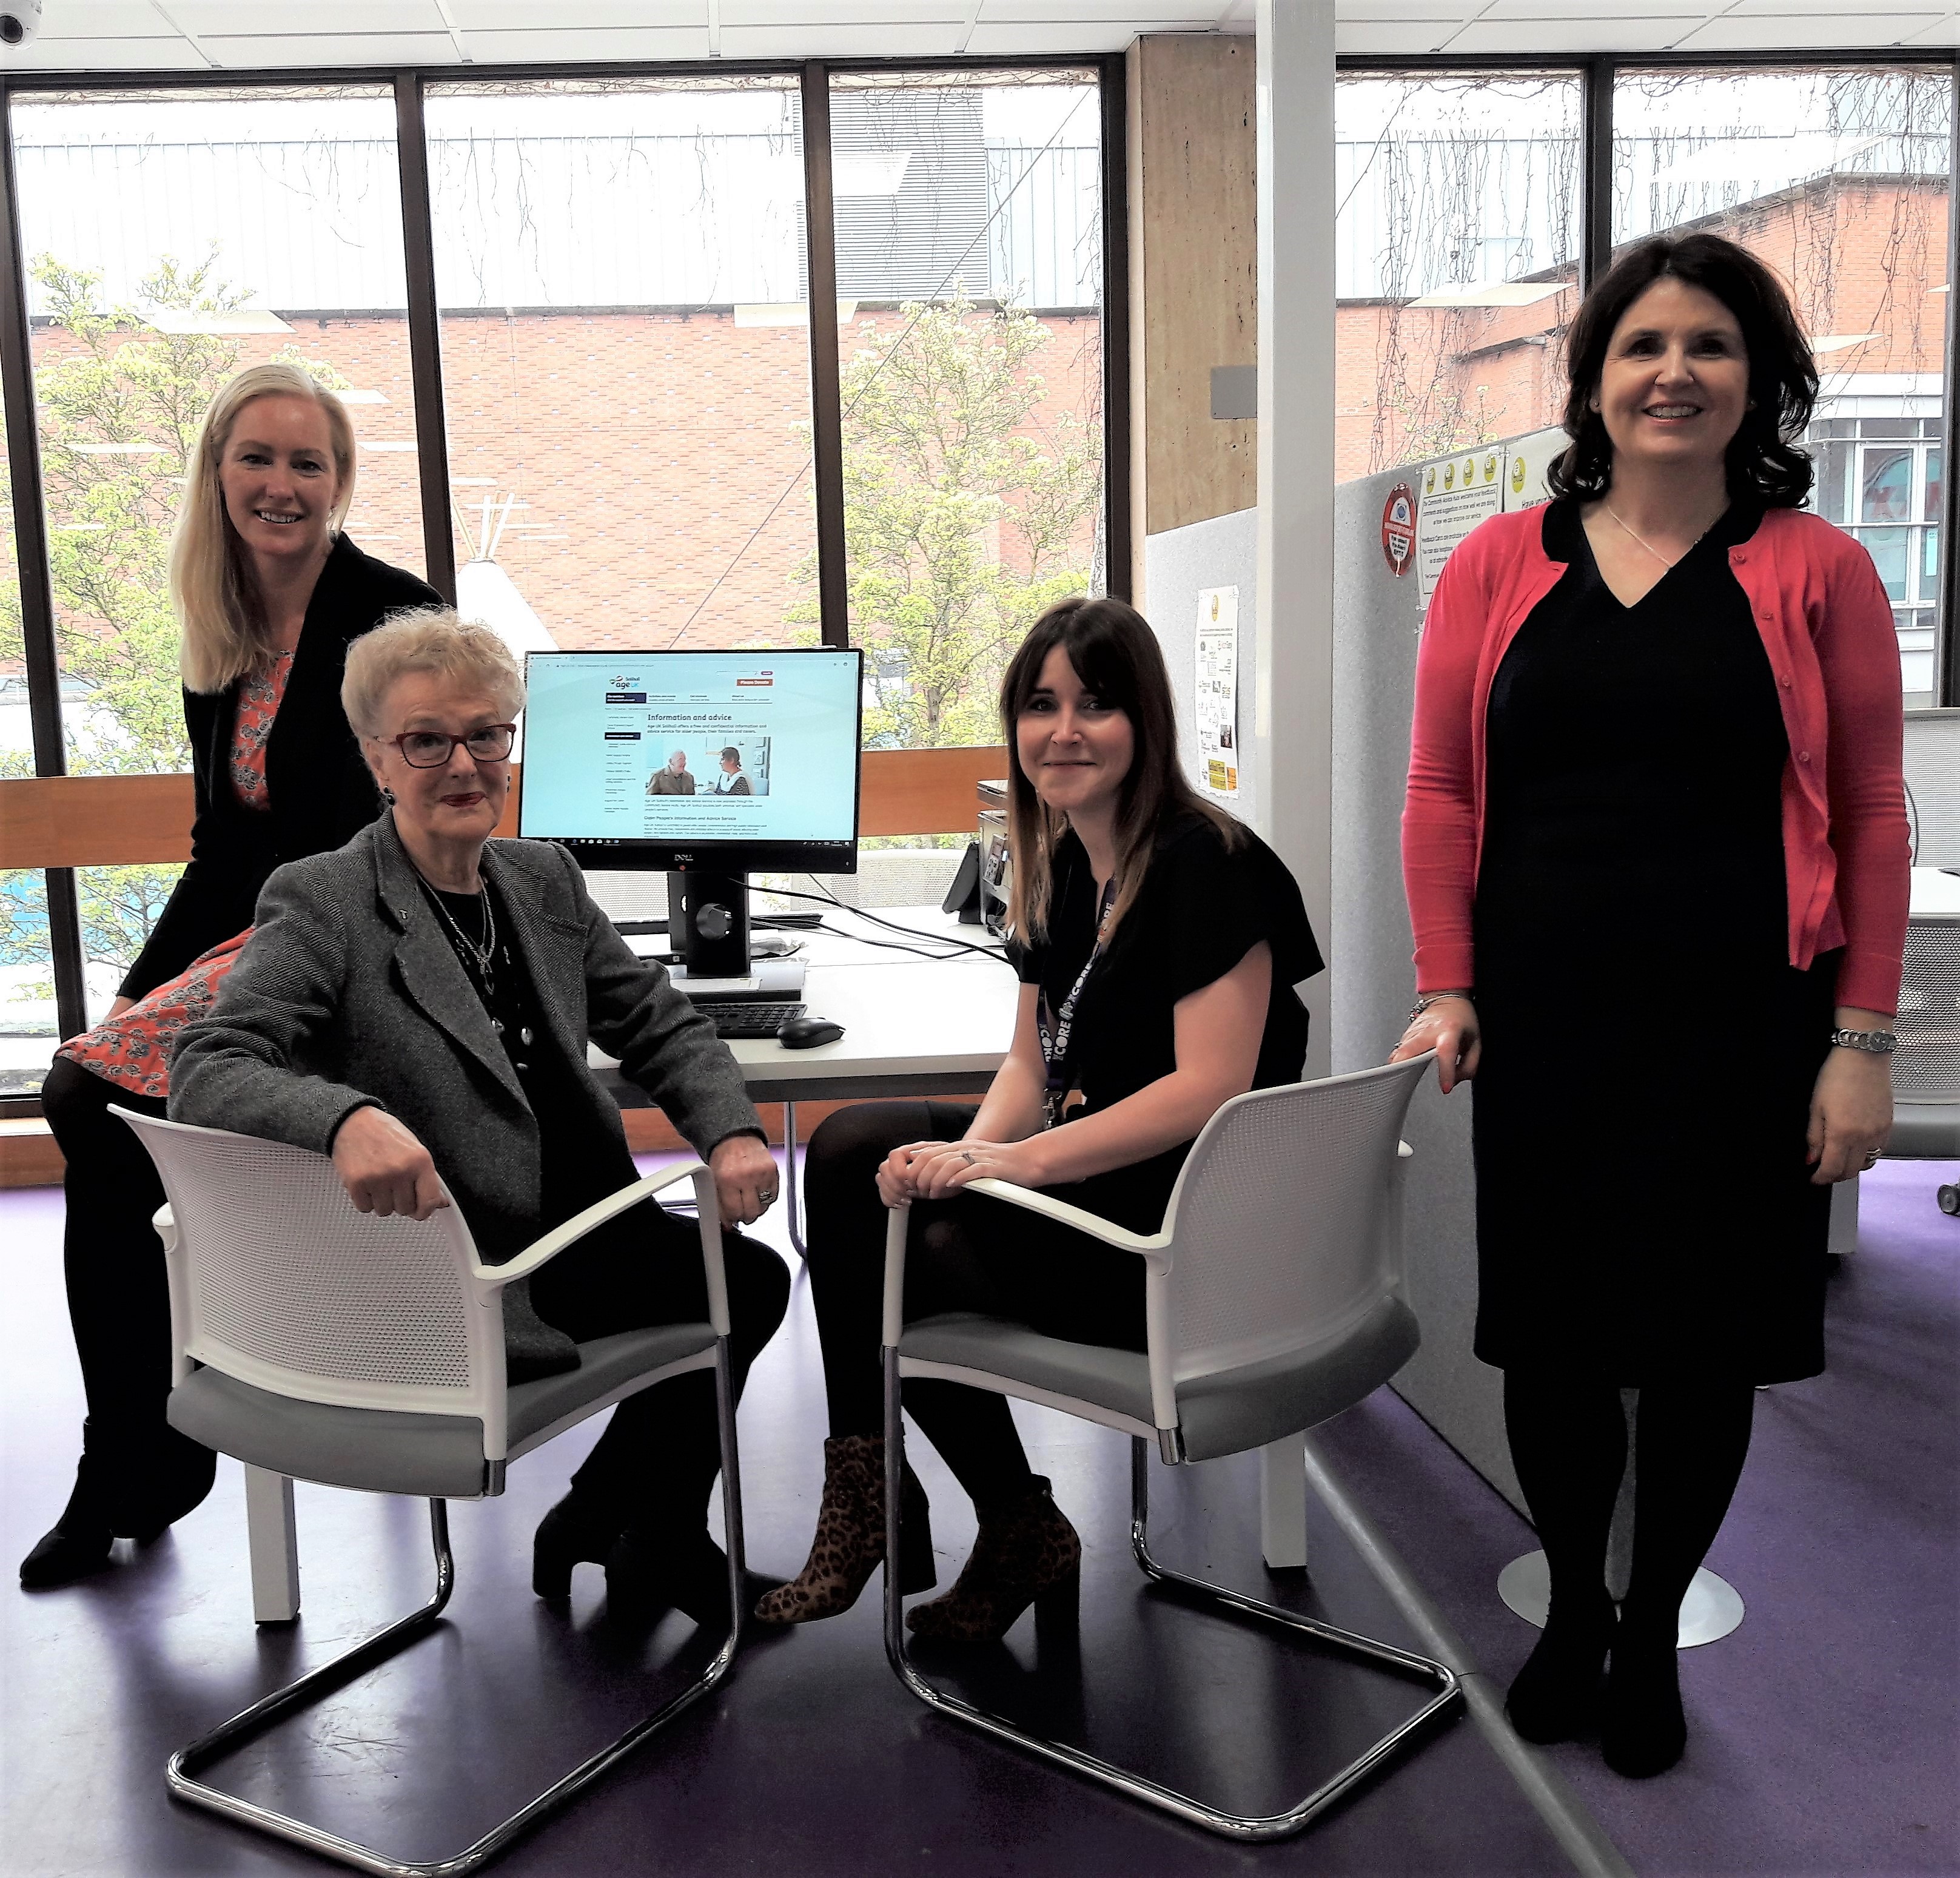 L-R Elaine Shannon (Health and Wellbeing Manager , Xoserve), Margaret (Age UK Solihull client - name has been changed and model used for confidentiality), Kate Turrall (Head of Information and IT, Age UK Solihull), Samantha Scagell (Wellbeing and Engagement Coordinator, Xoserve) with one of the self-help computers.